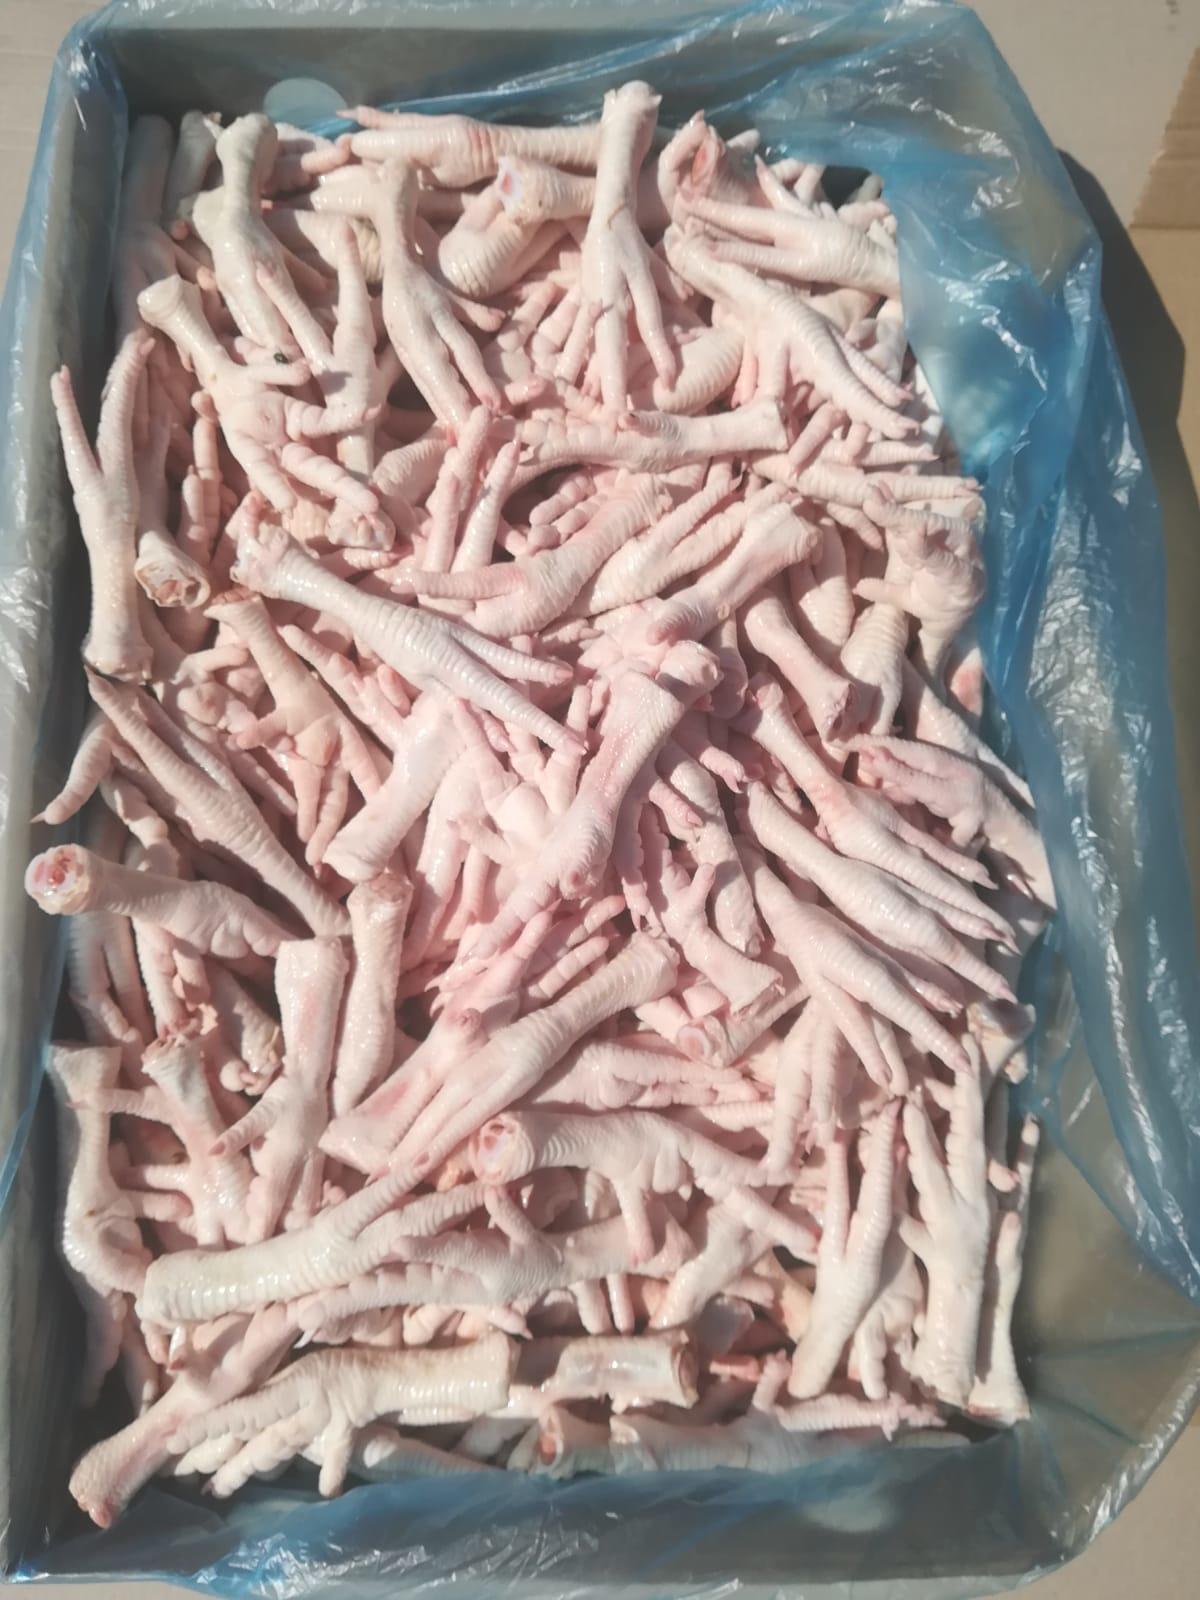 GRADE A FROZEN CHICKEN PAWS AND CHICKEN FEET FOR WHOLESALE